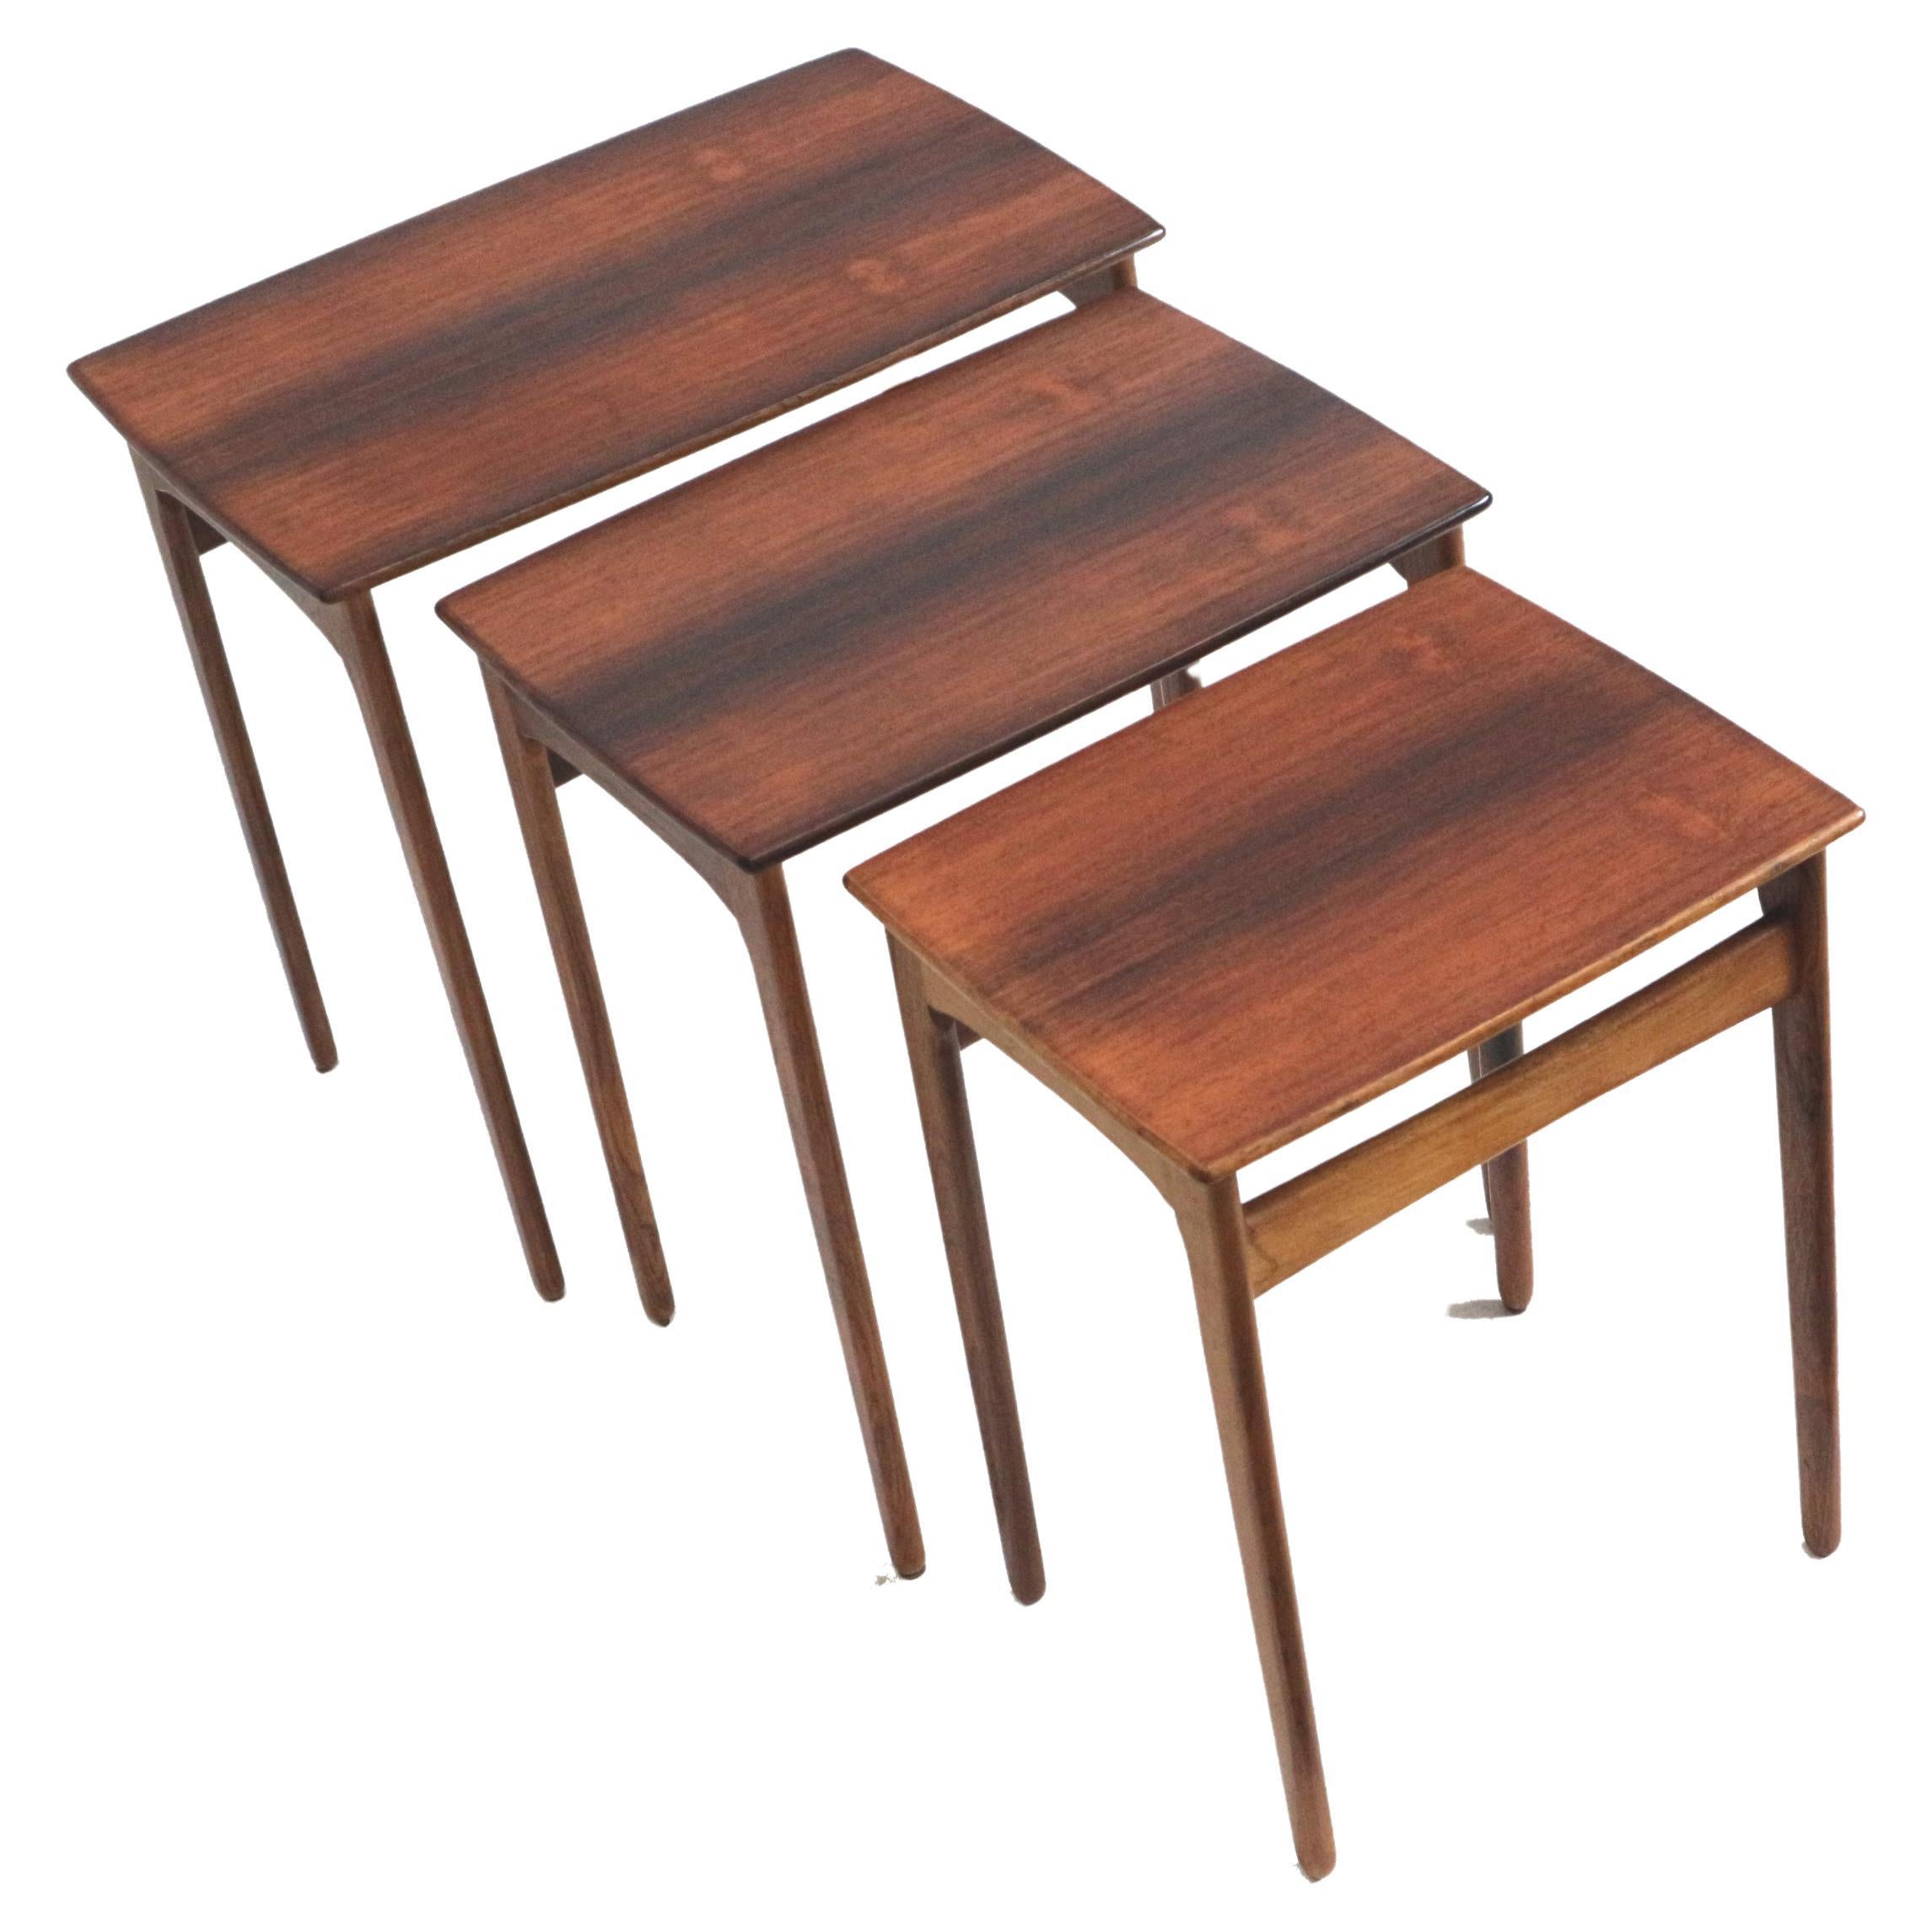 Danish vintage rosewood nesting tables / set of 3 side tables made in the 60s For Sale